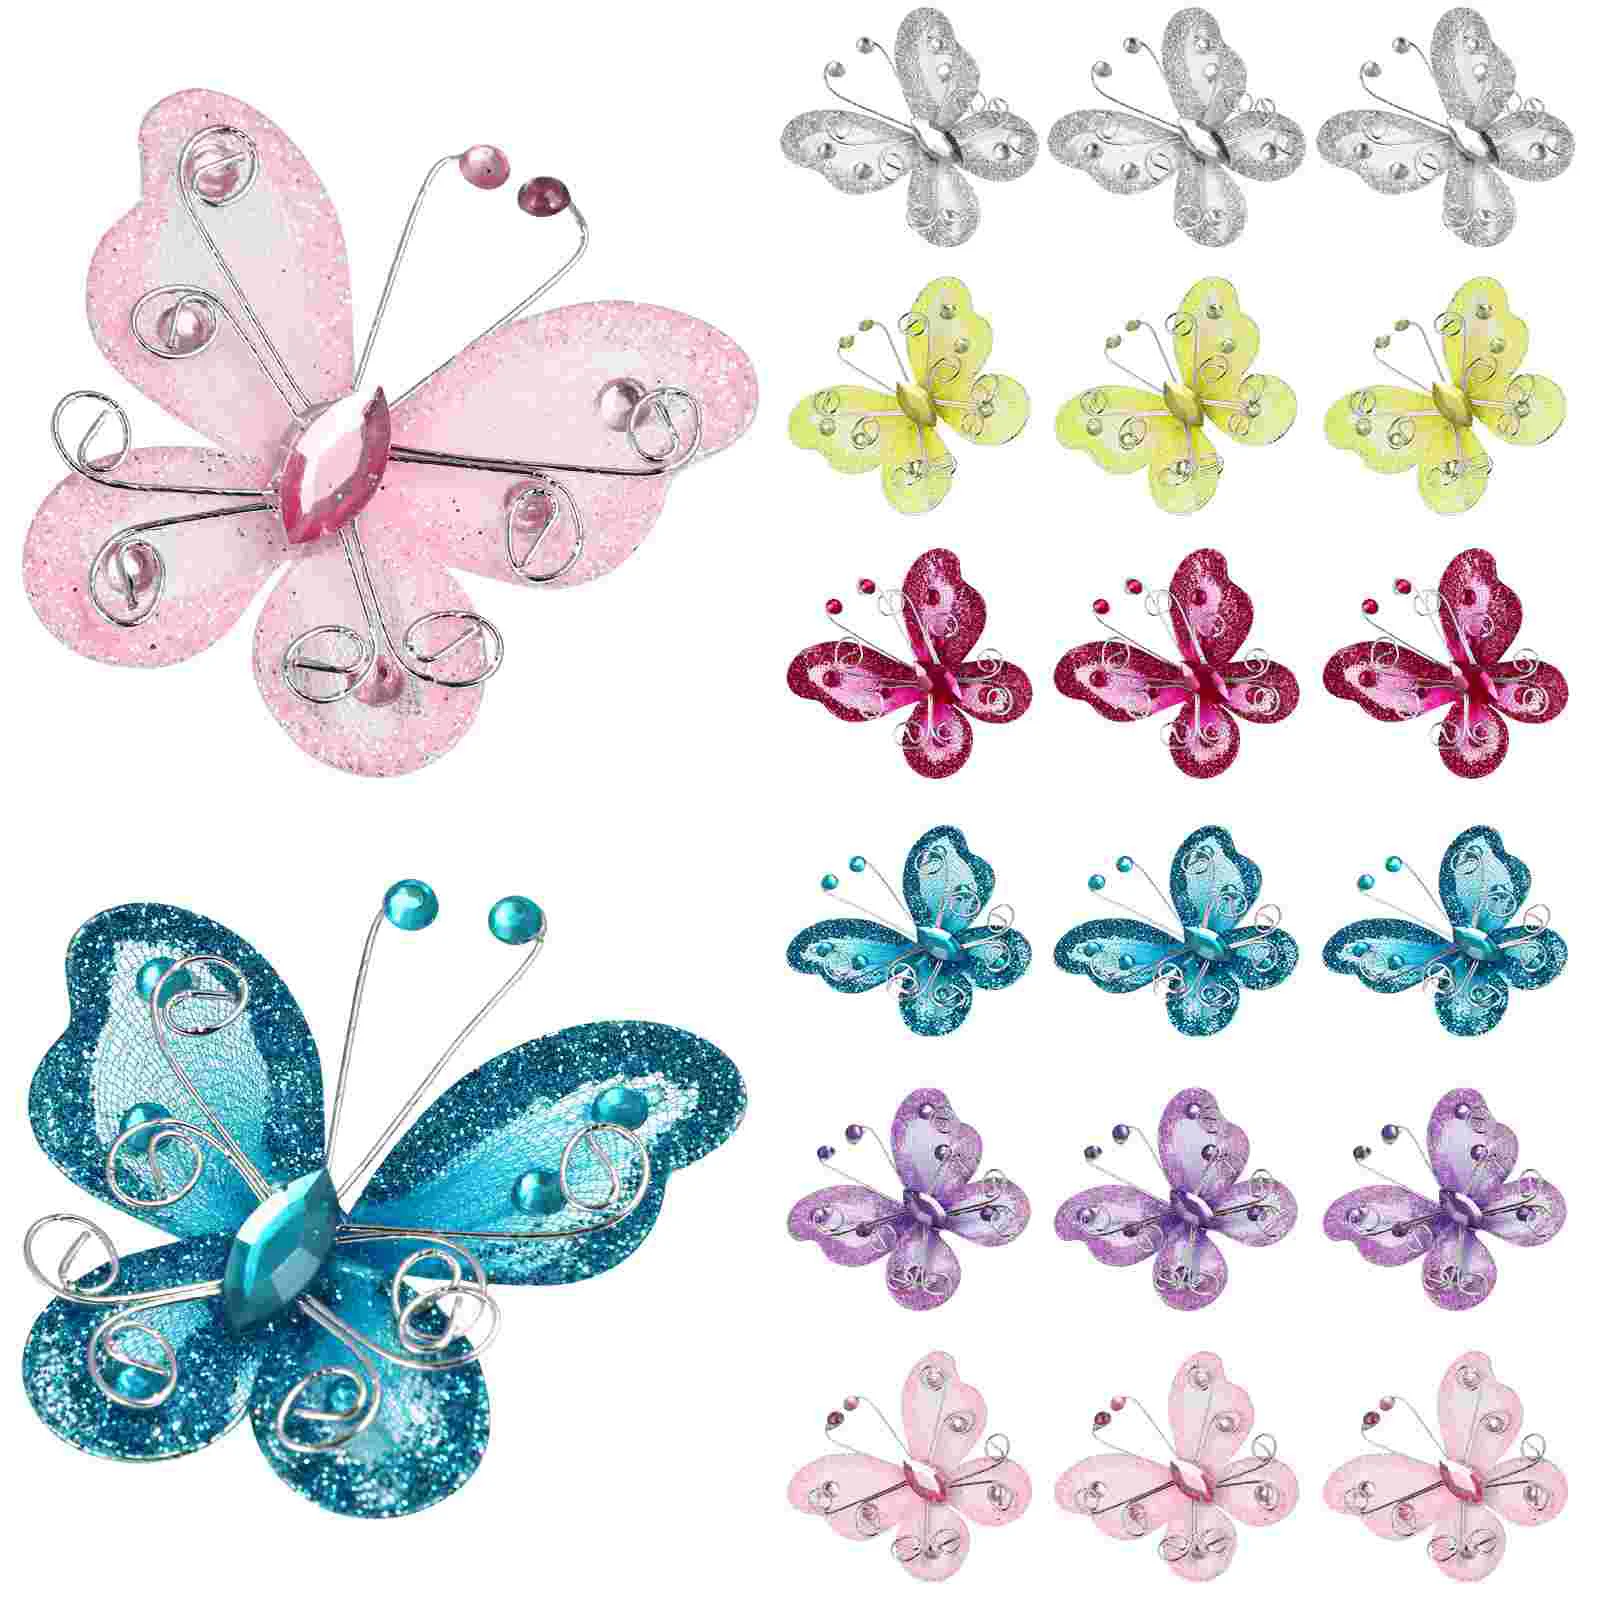 

36 Pcs Fake Butterflies Decor Iron Wire Realistic Butterfly Ornament Organza Craft Bouquet Accessories Ornaments